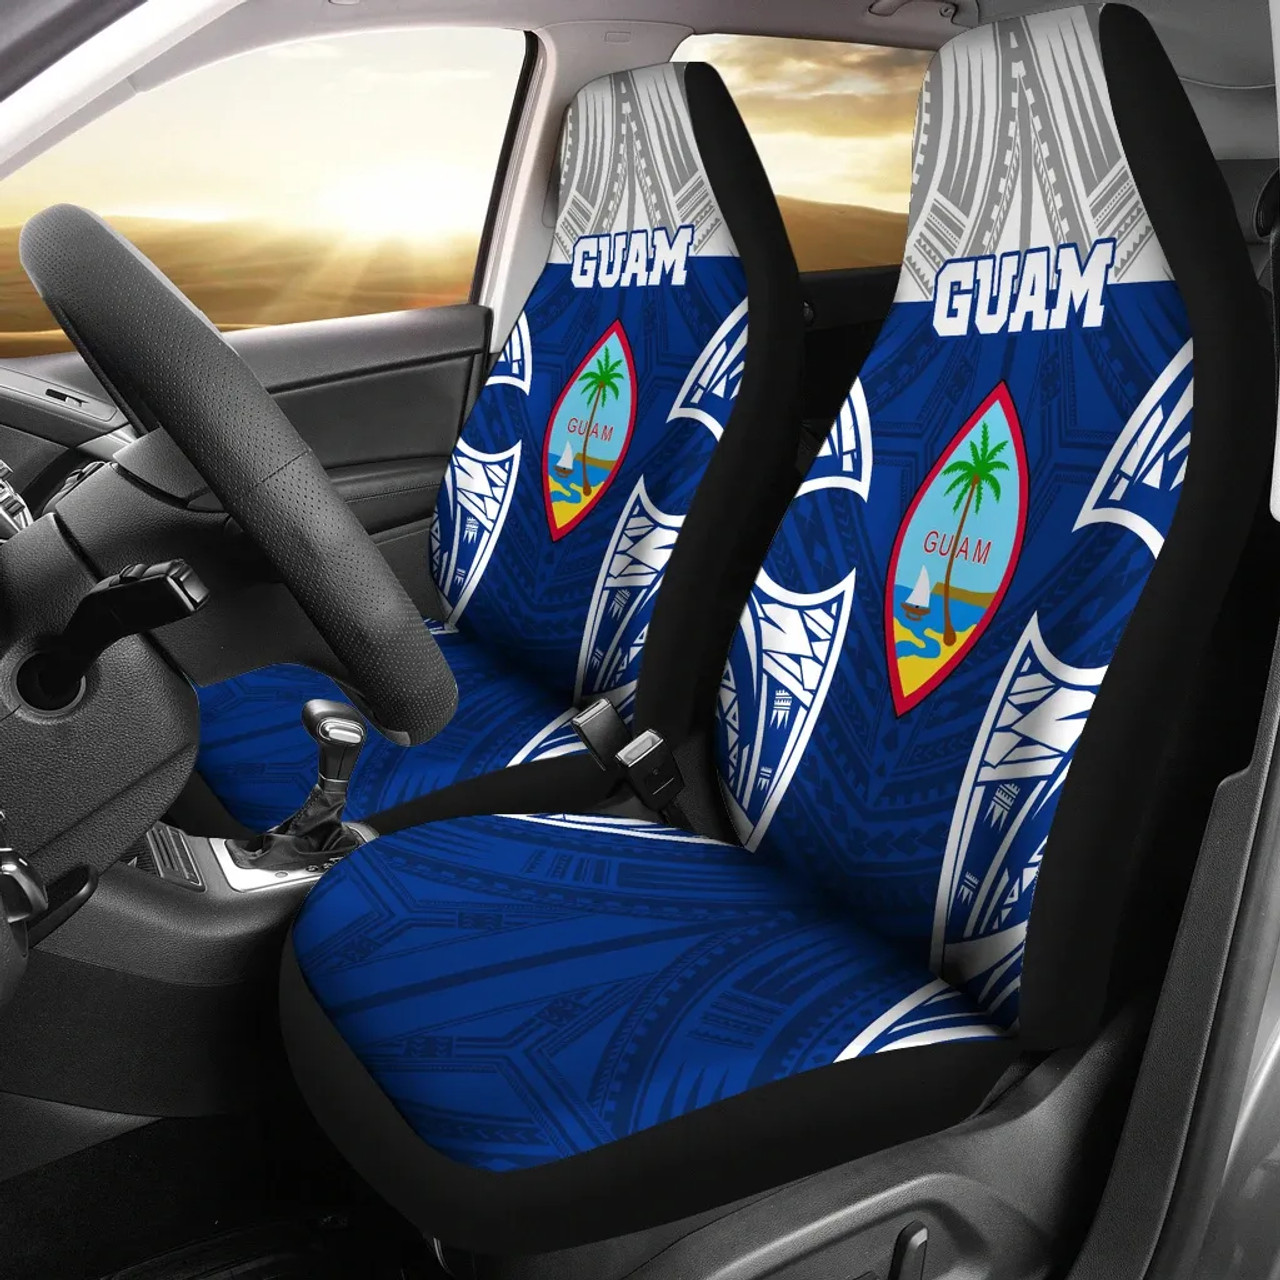 Guam Polynesian Car Seat Covers - Pattern With Seal Blue Version